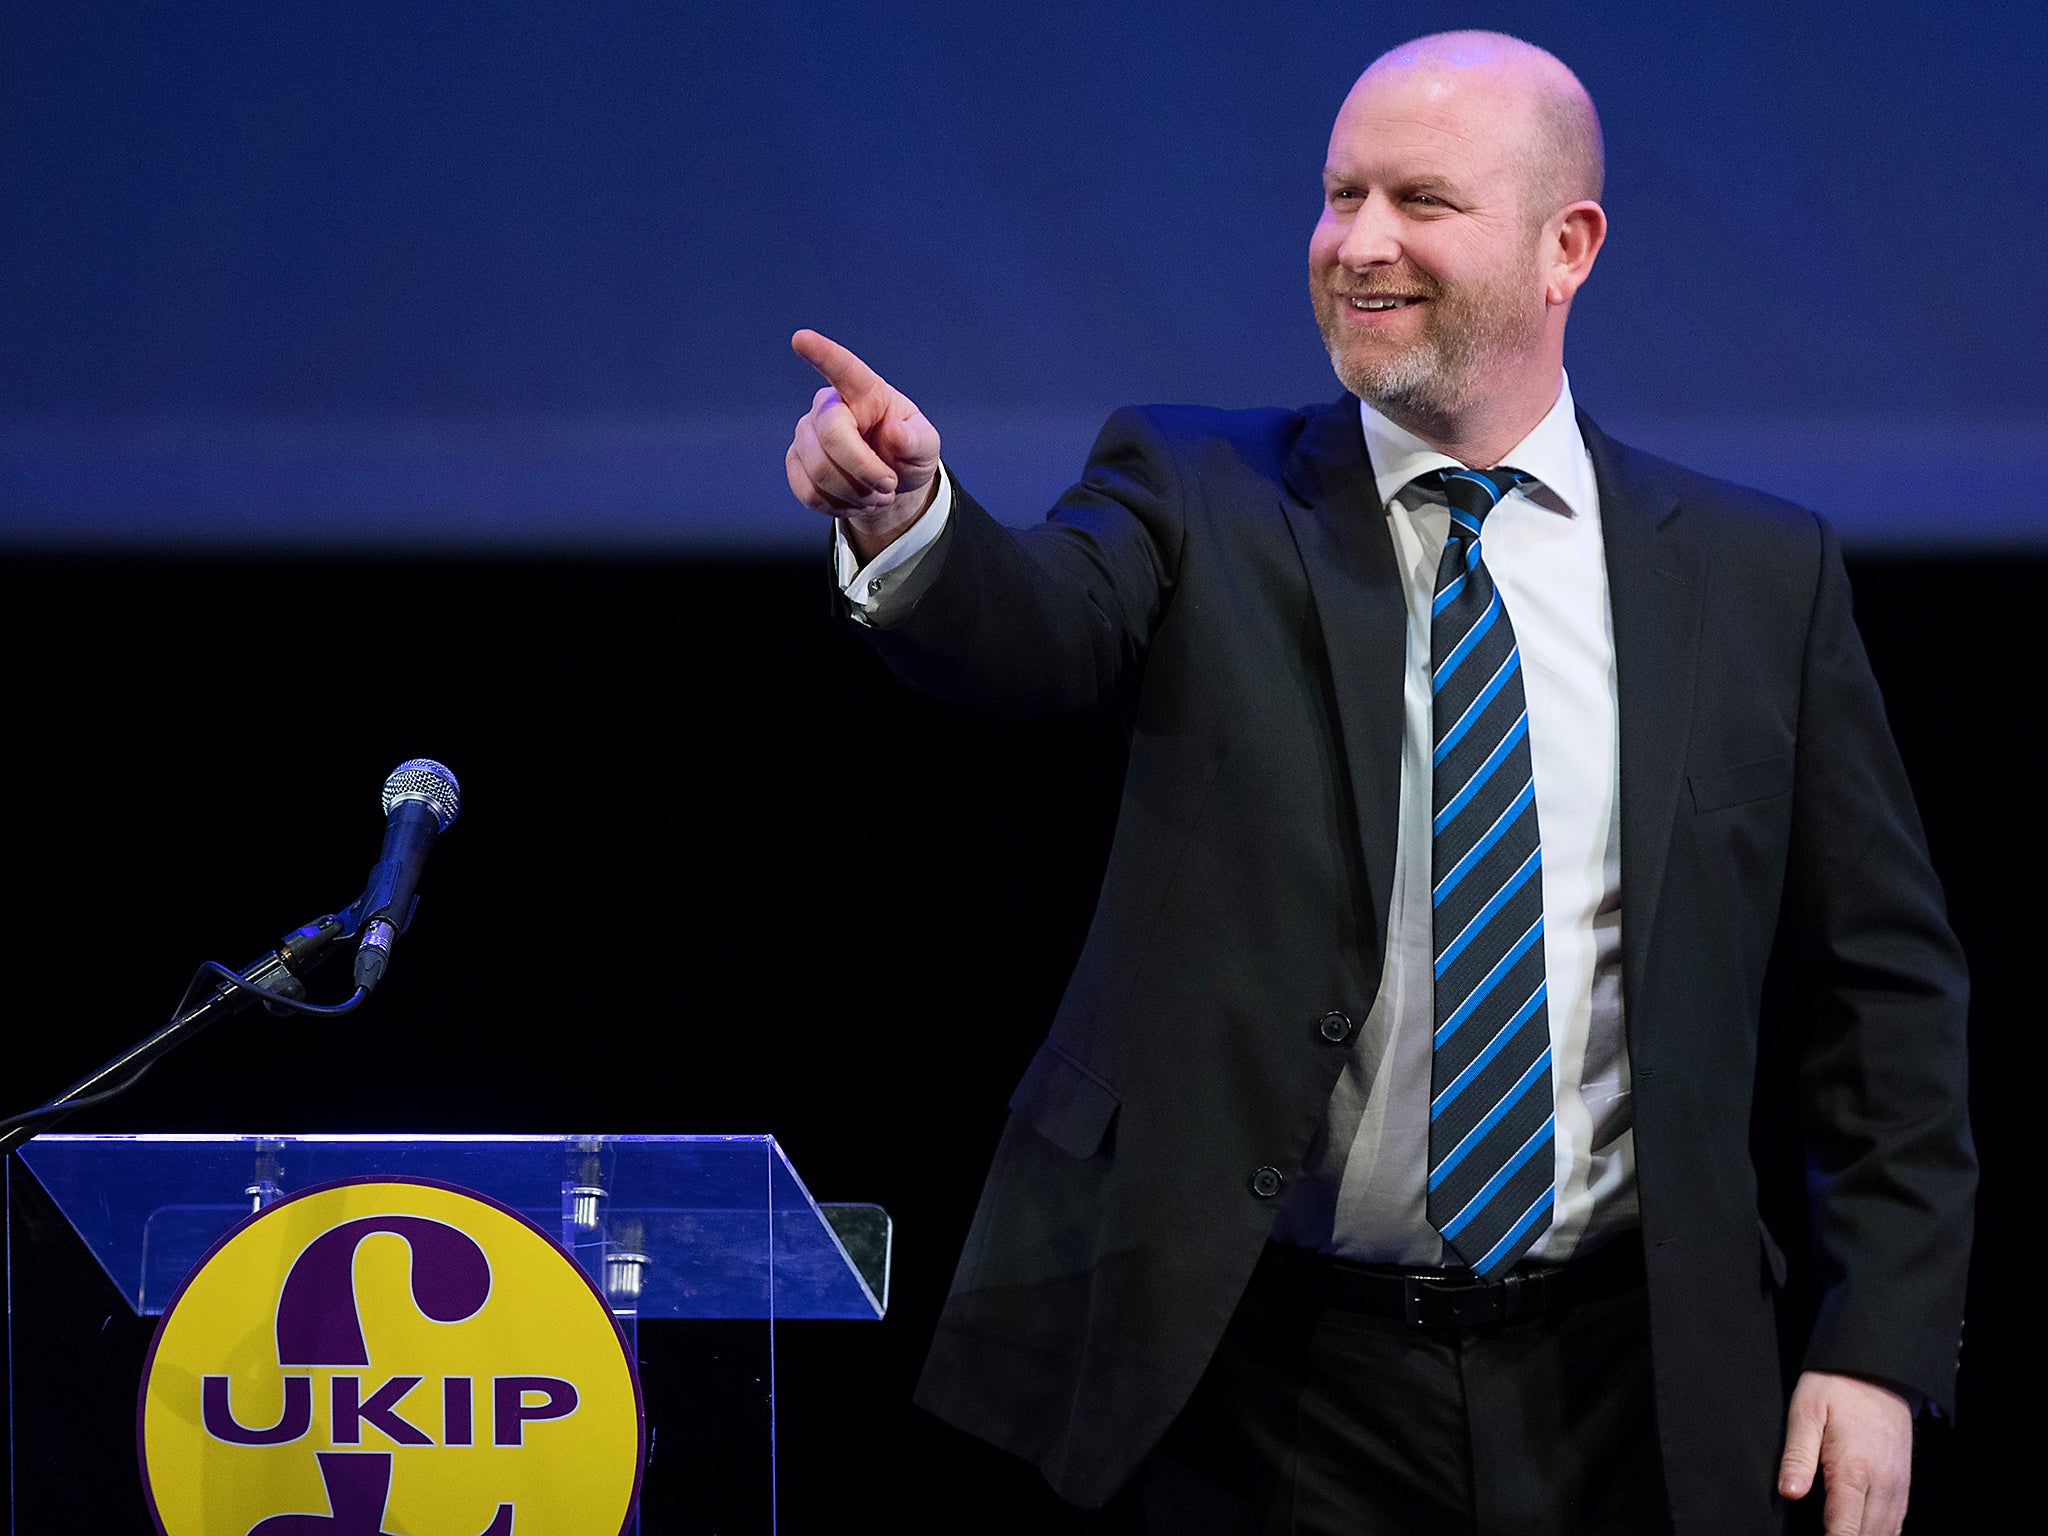 At the party’s regional conference in Weymouth, the Ukip leader said there were positives to be taken from his ‘bruising’ defeat in the Stoke-on-Trent Central by-election